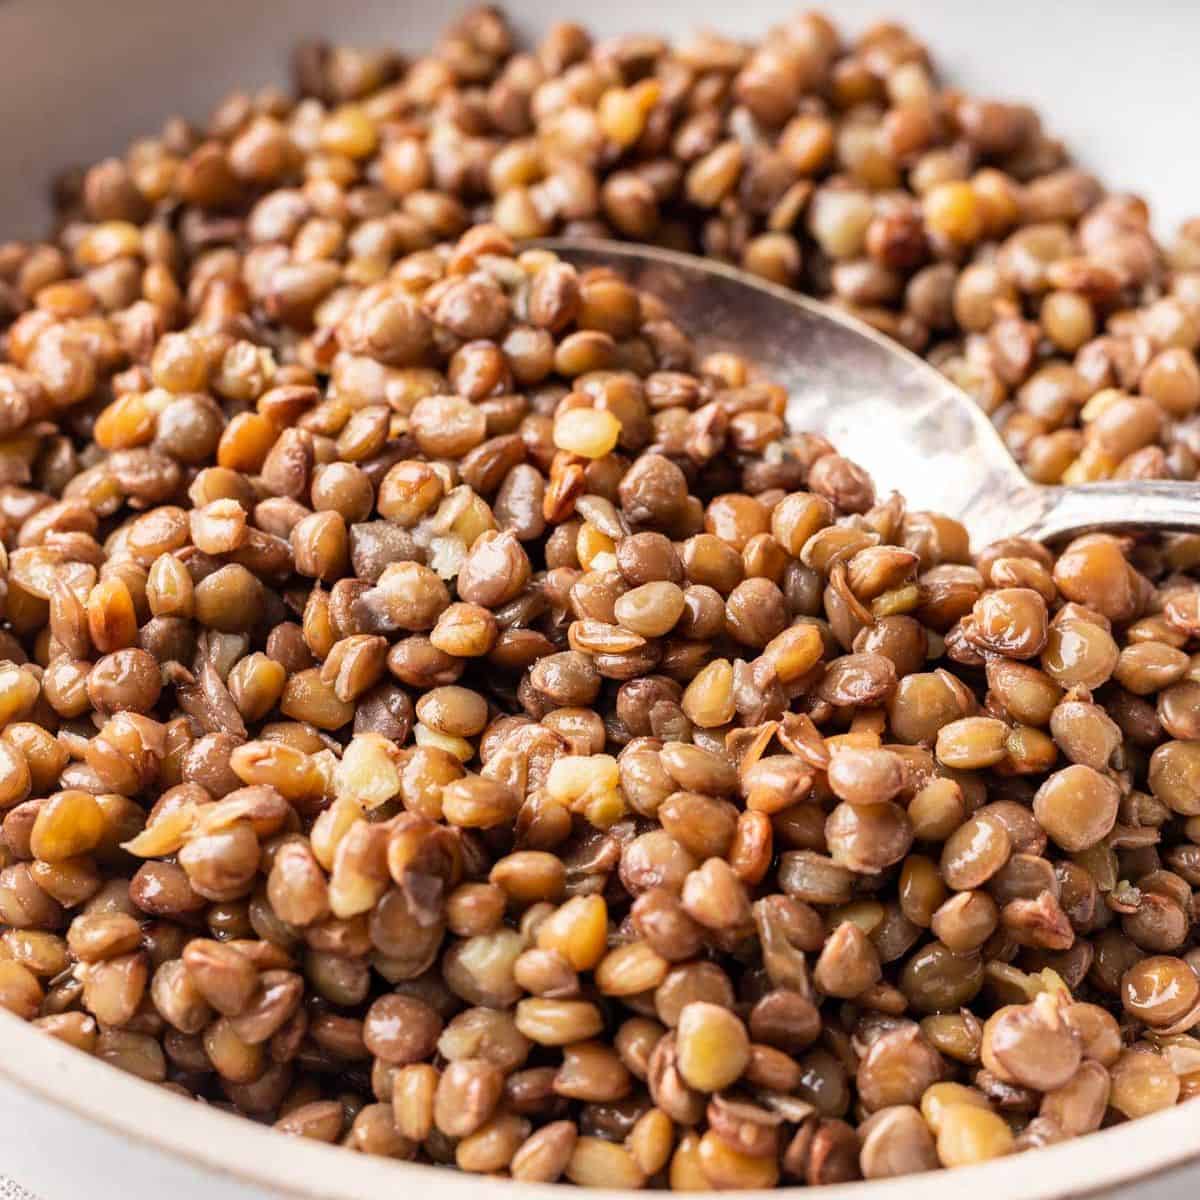 https://homecookedroots.com/wp-content/uploads/2023/05/How-to-Cook-Lentils-in-Rice-Cooker.jpg